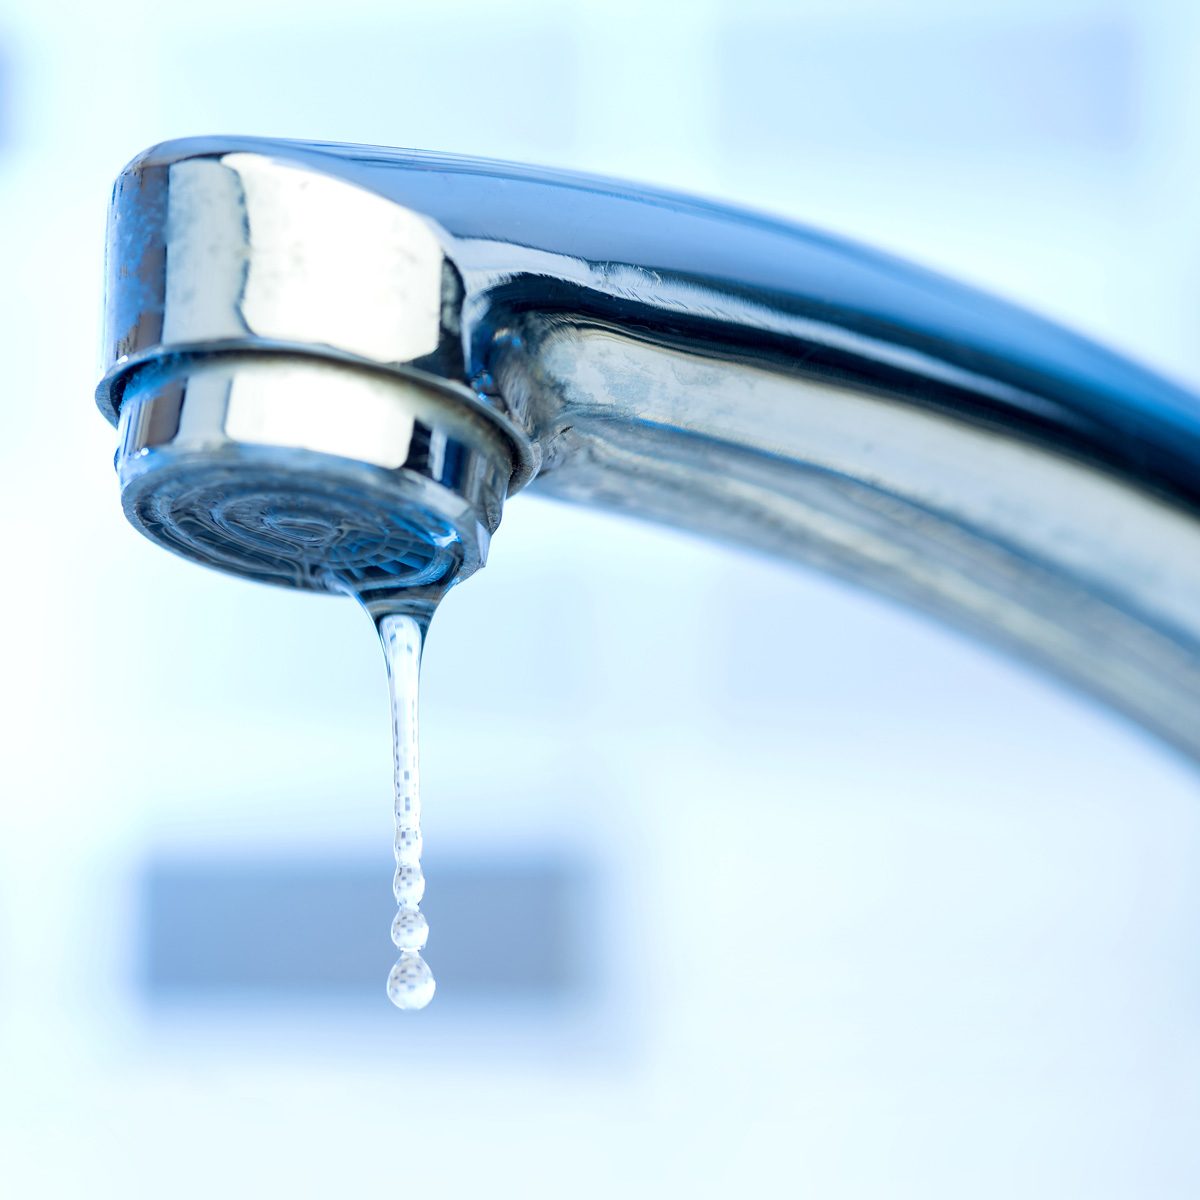 Water Storage Essentials: What To Do Before the Tap Runs Dry